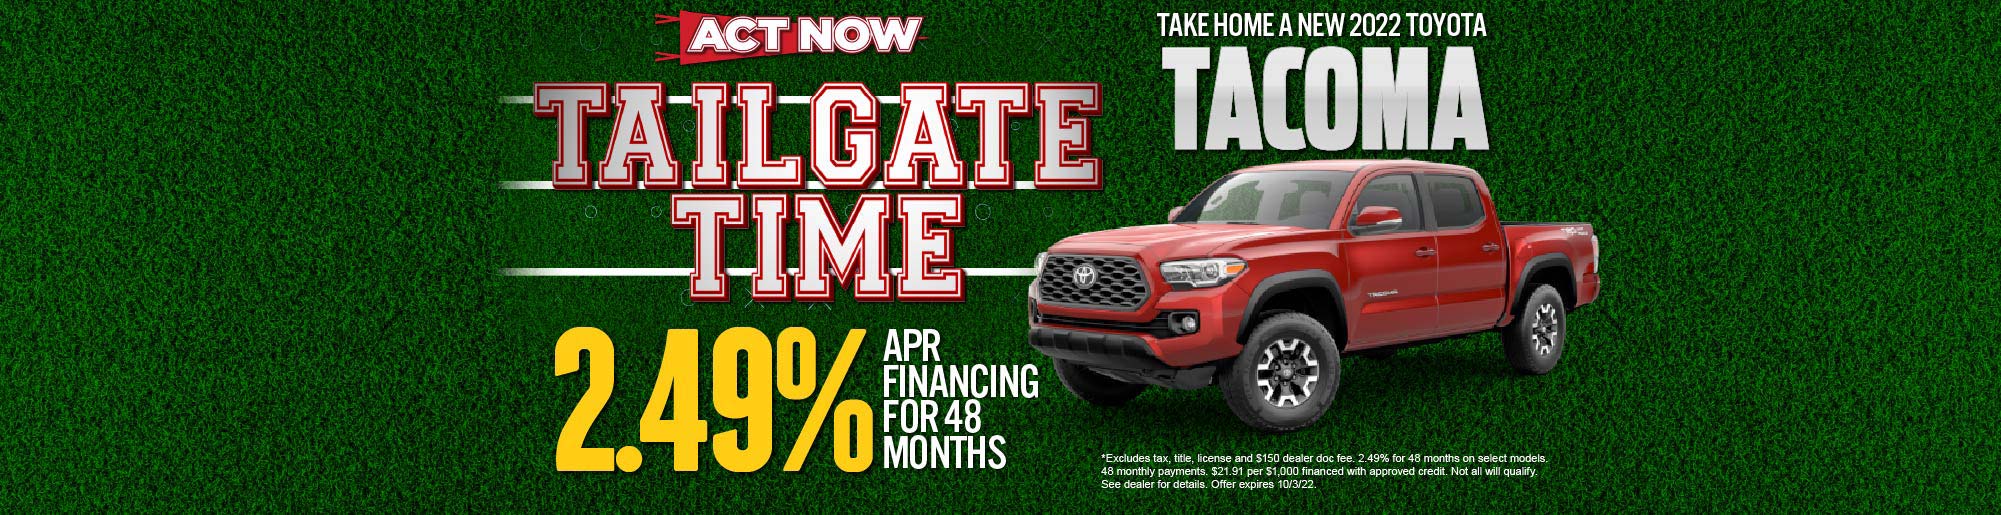 Brand New 2022 Toyota TAcoma - Get - 2.49% APR financing for 48 months. Act Now.